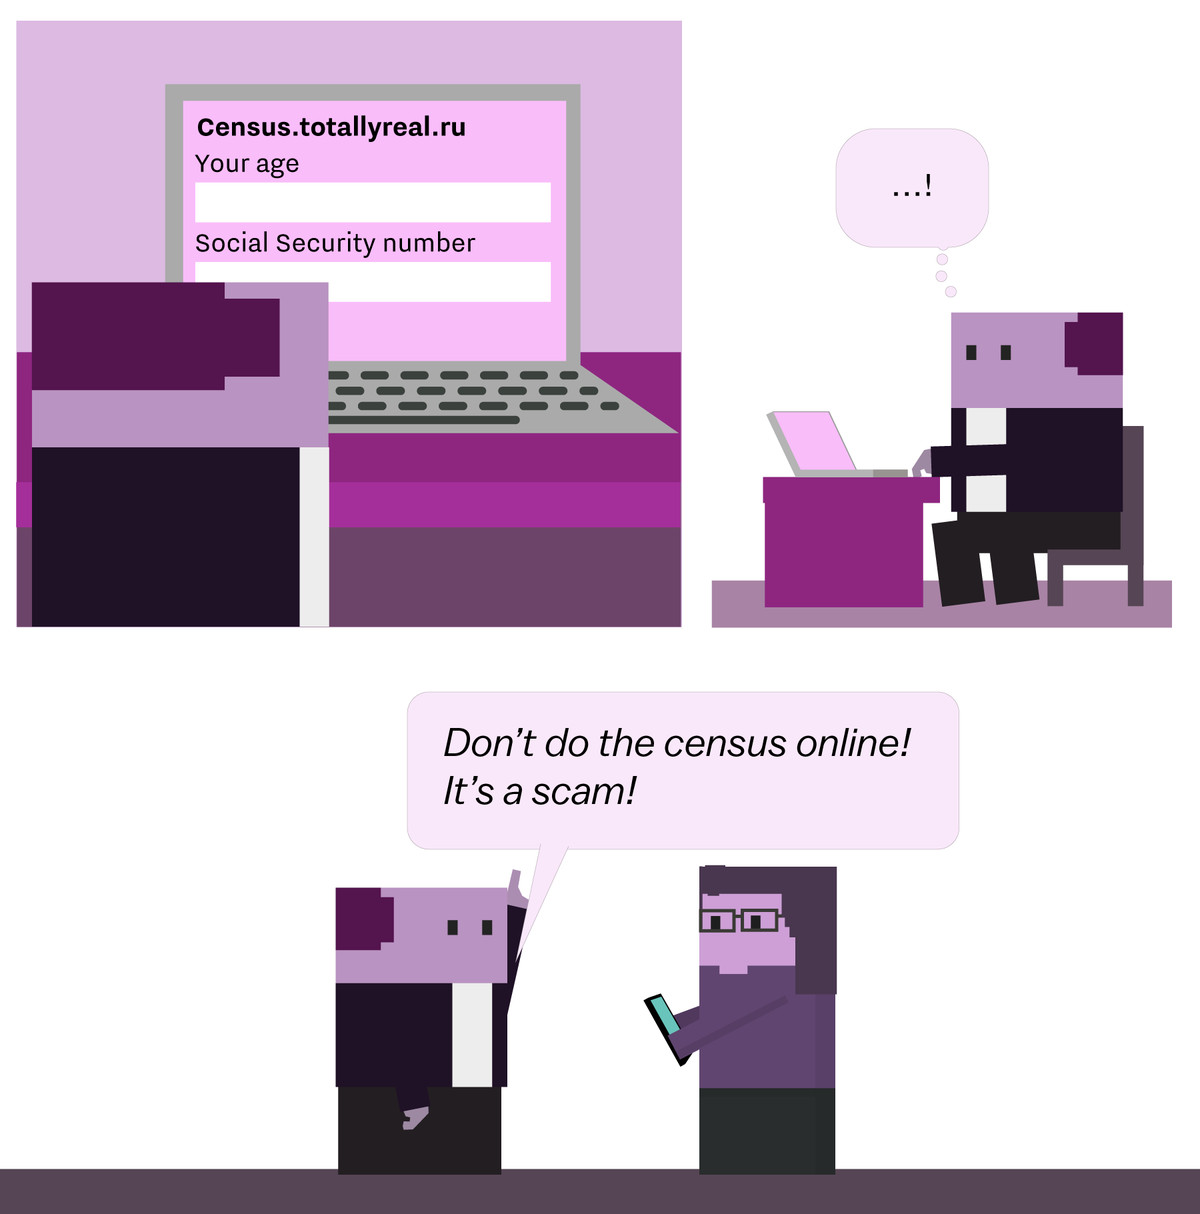 Comic panel: Man who encounters a phishing scam, and tells everyone that the census online portion is all a scam.